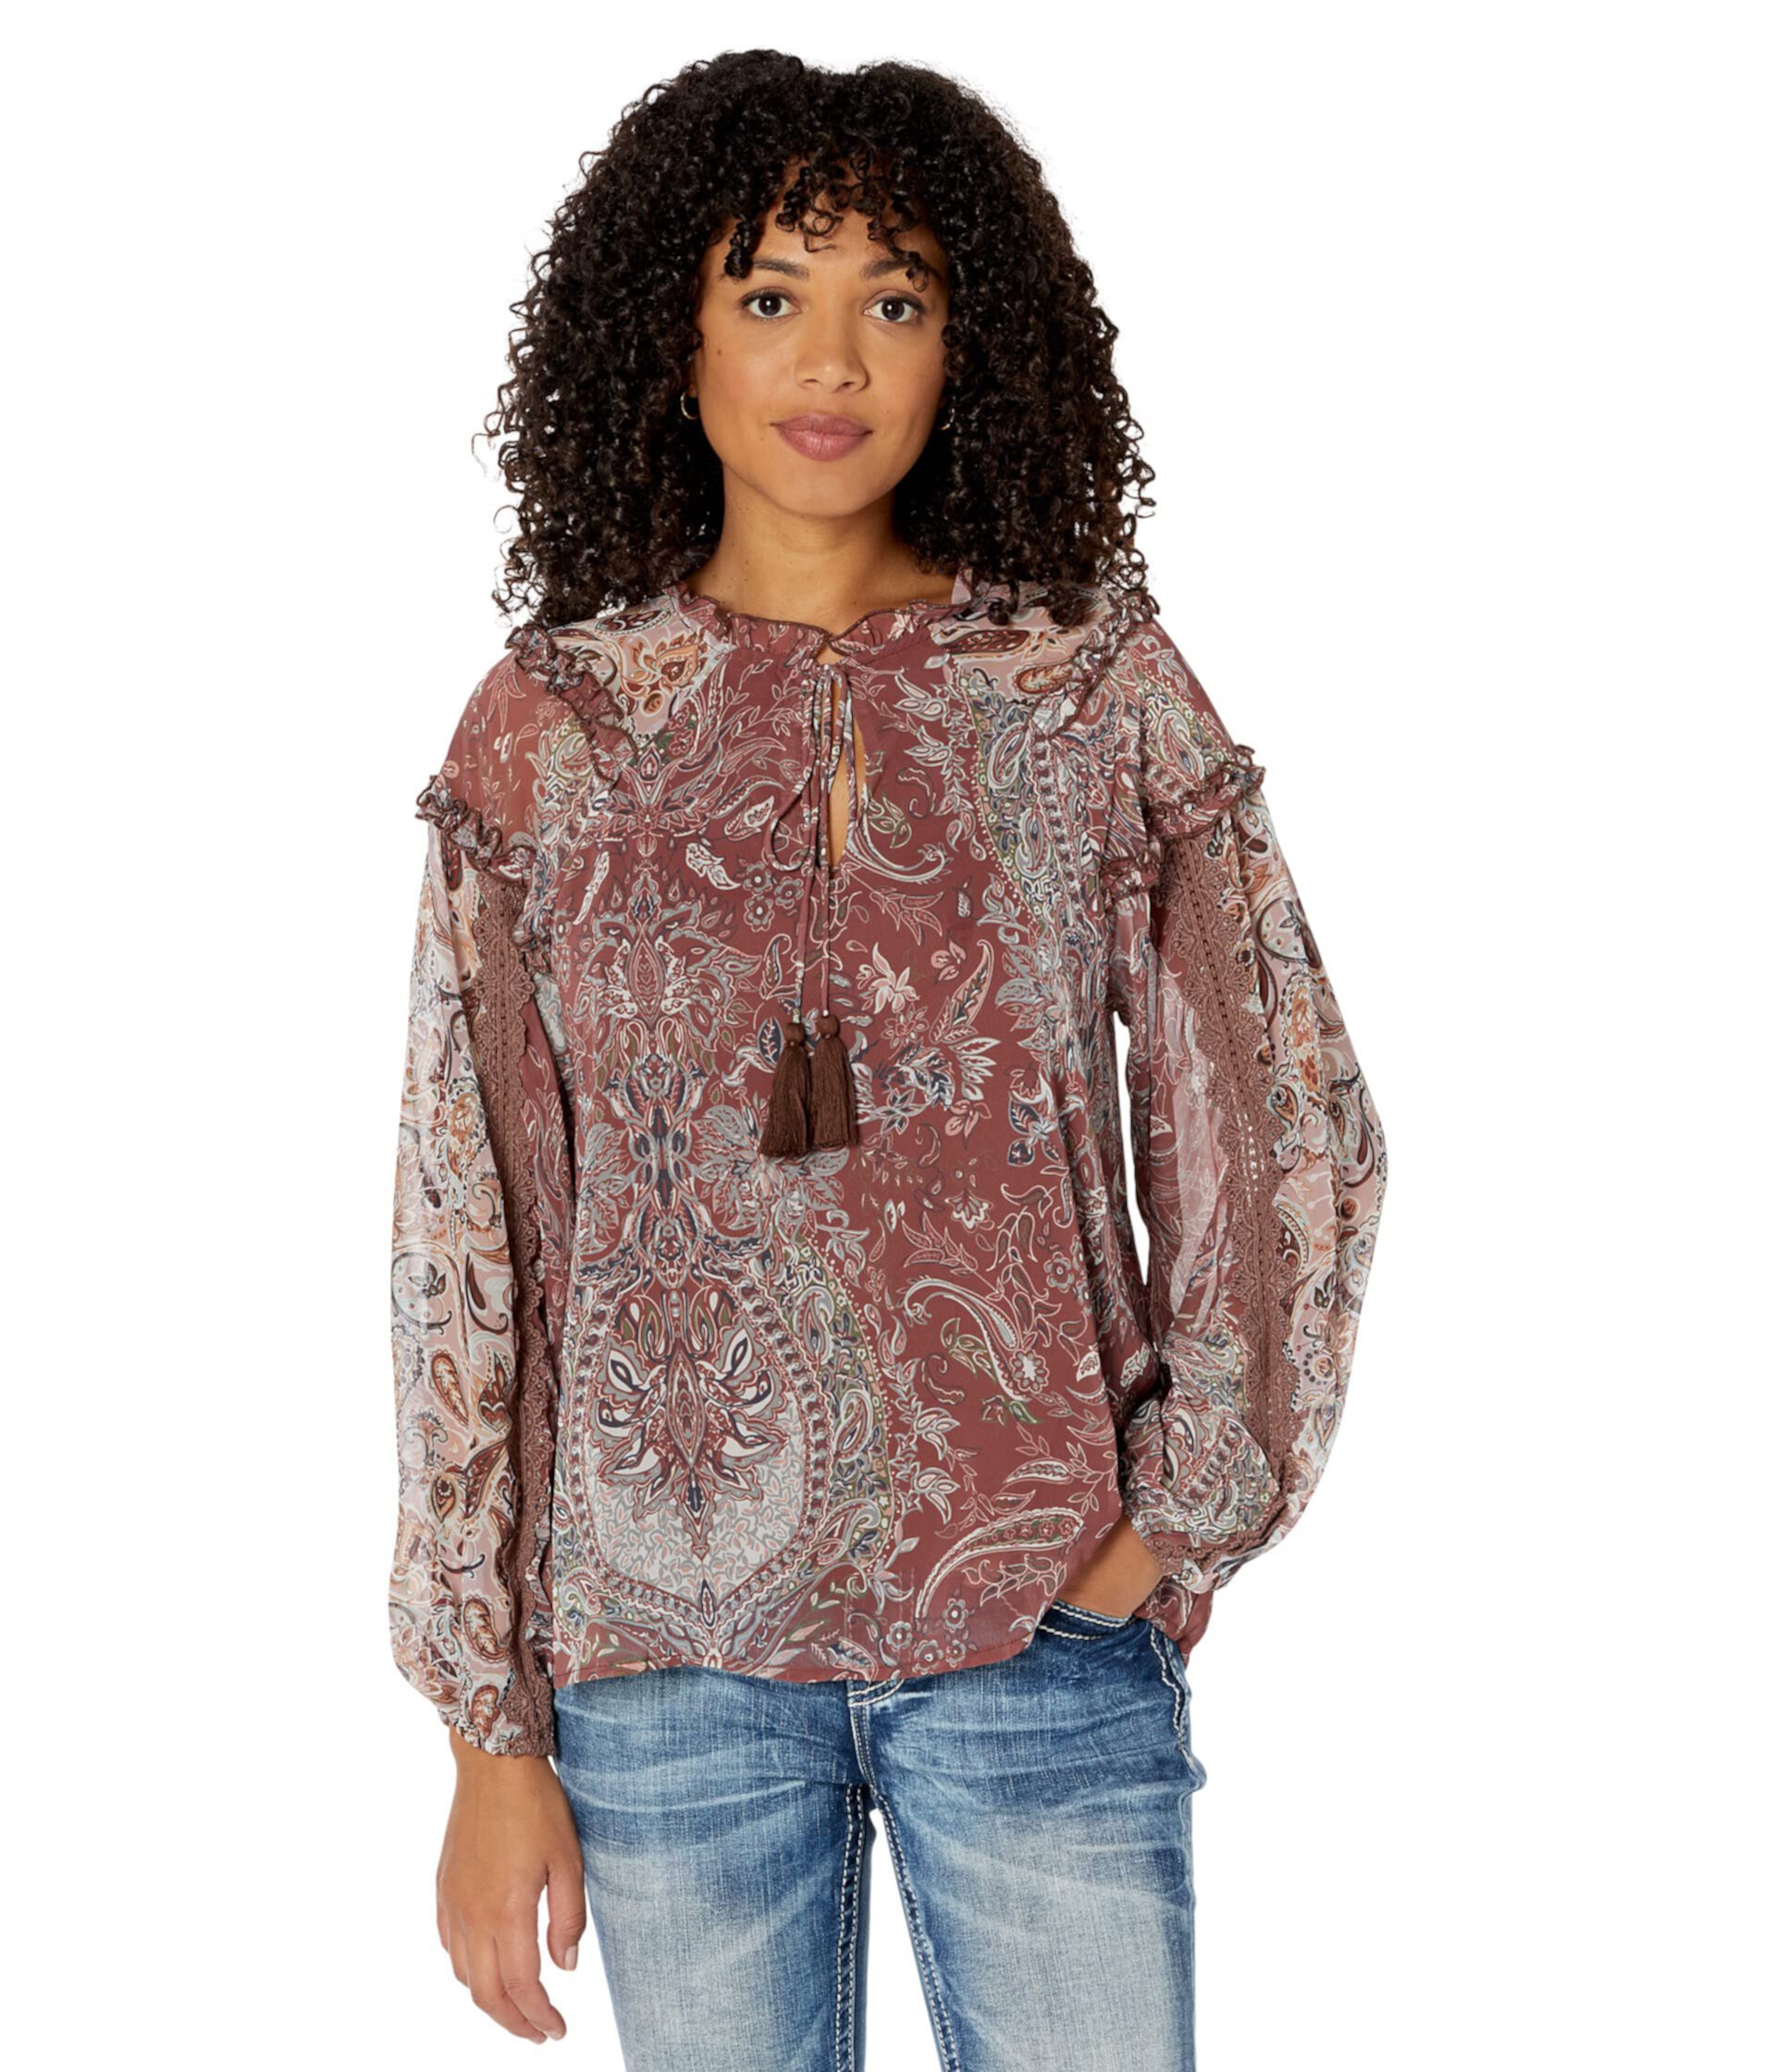 Paisley Popover Blouse Miss Me